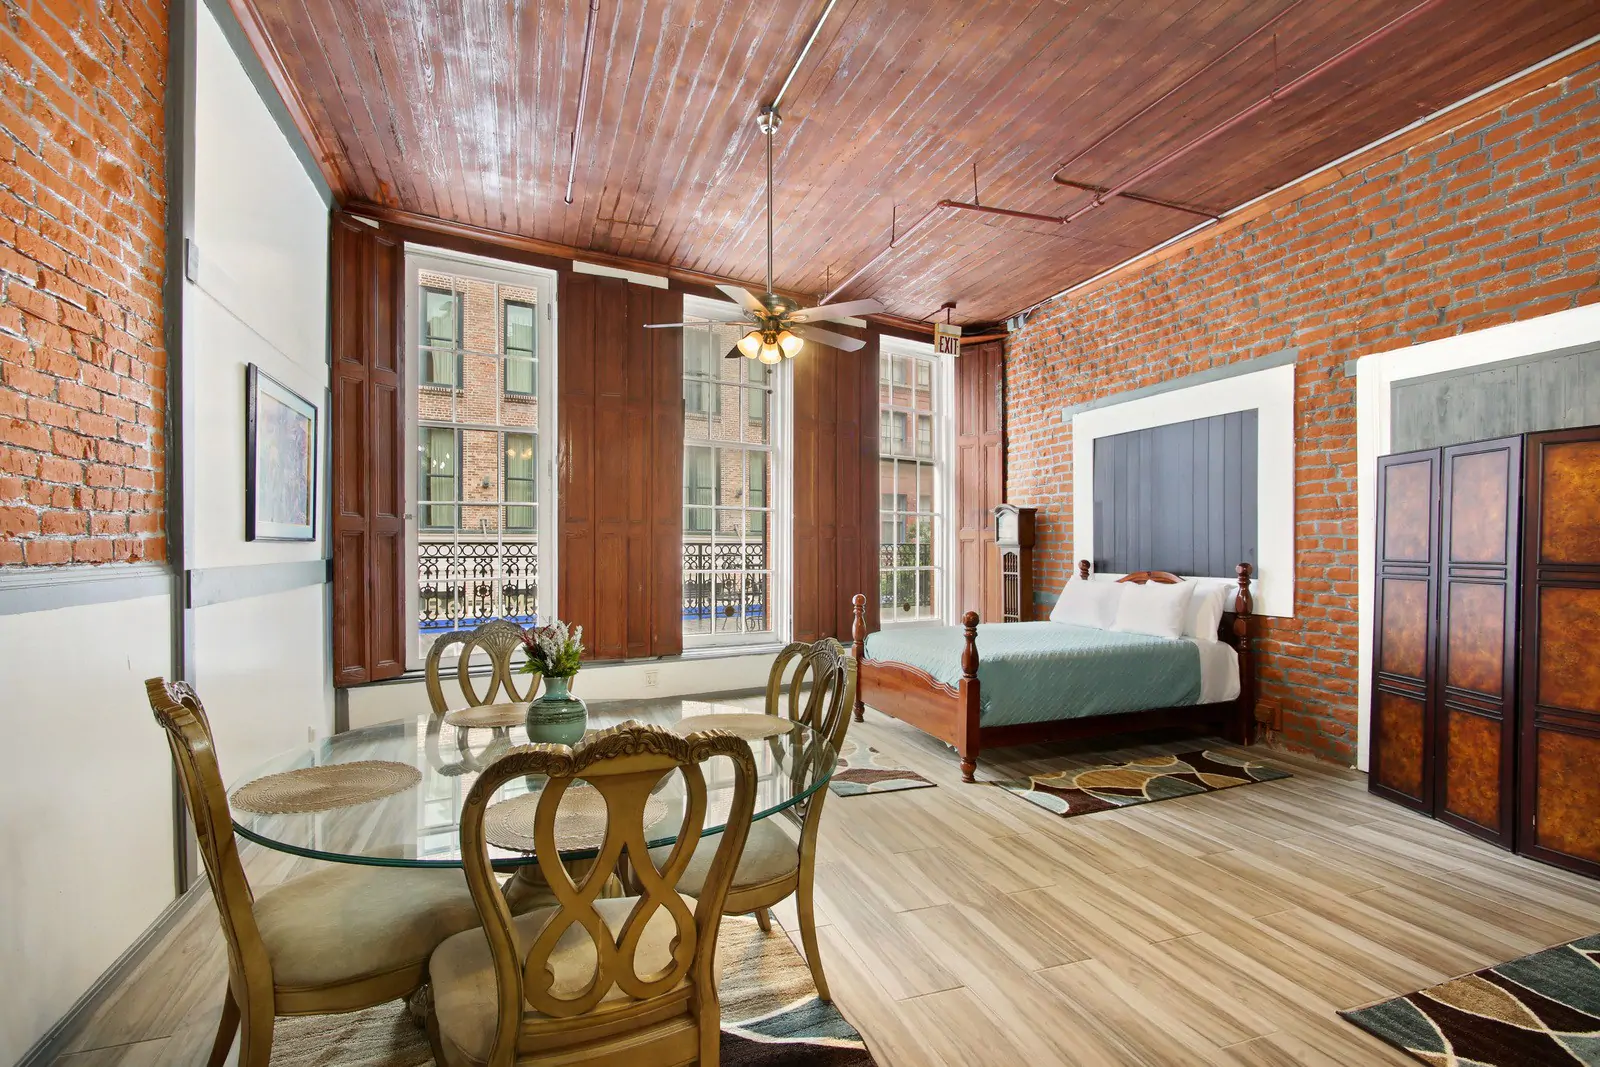 Photo of an Airbnb in New Orleans that is a downtown loft with hardwood ceilings.